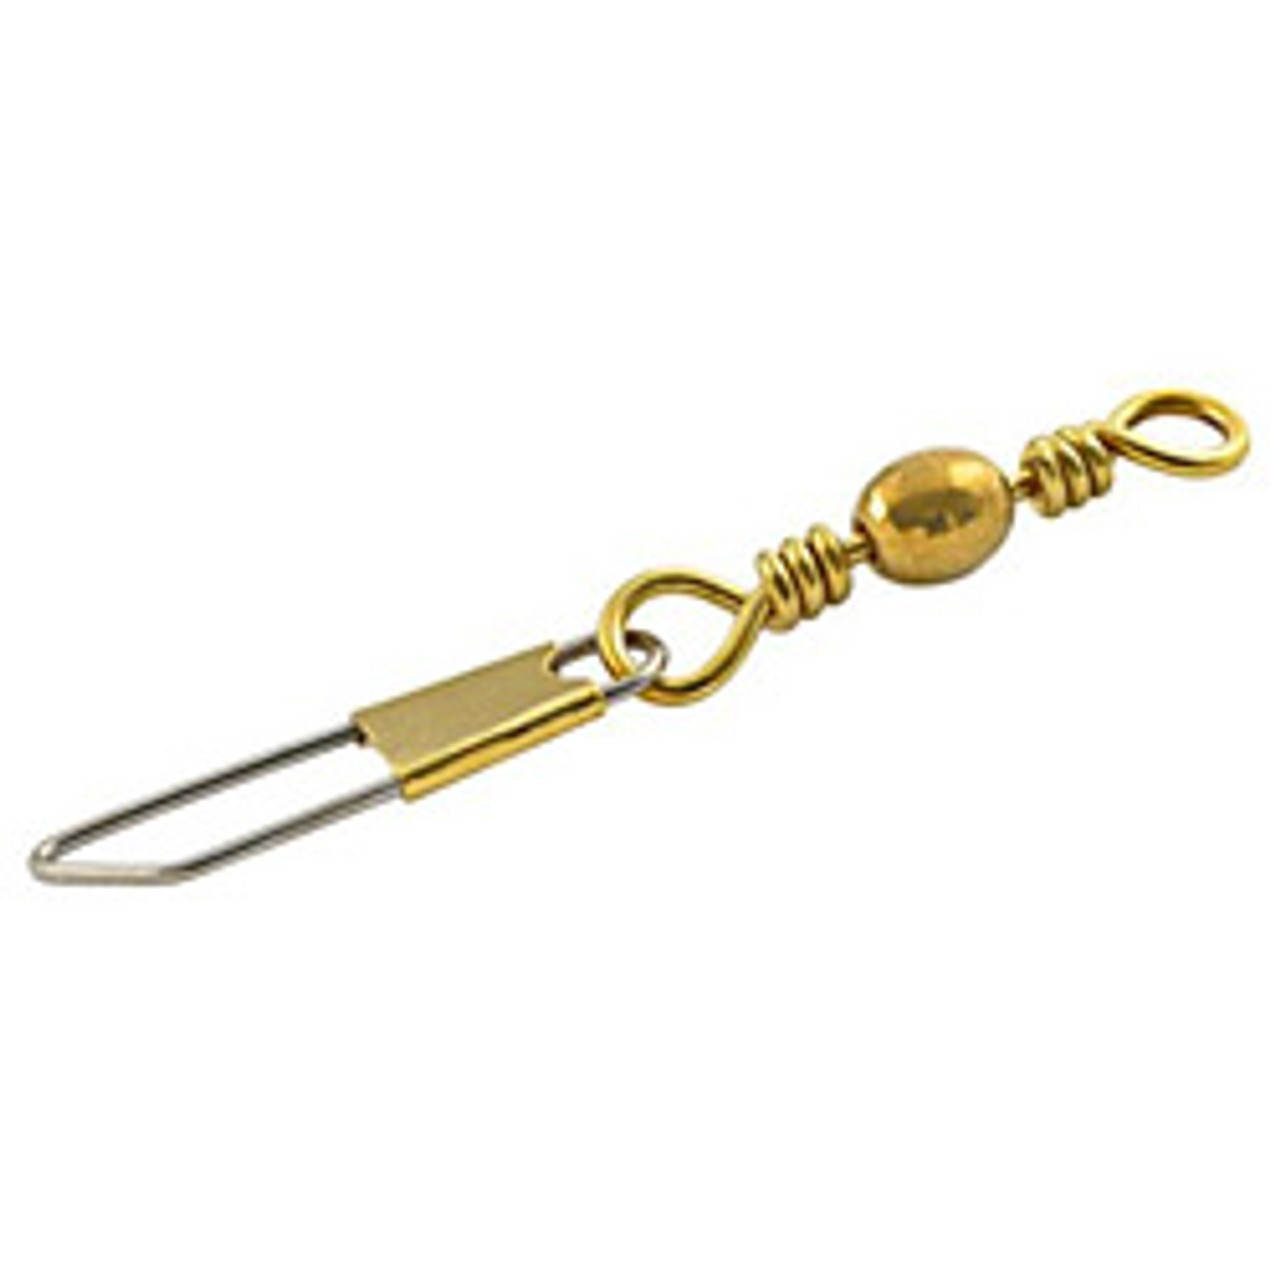 Brass Barrel Swivels with Safety Snaps by Danielson